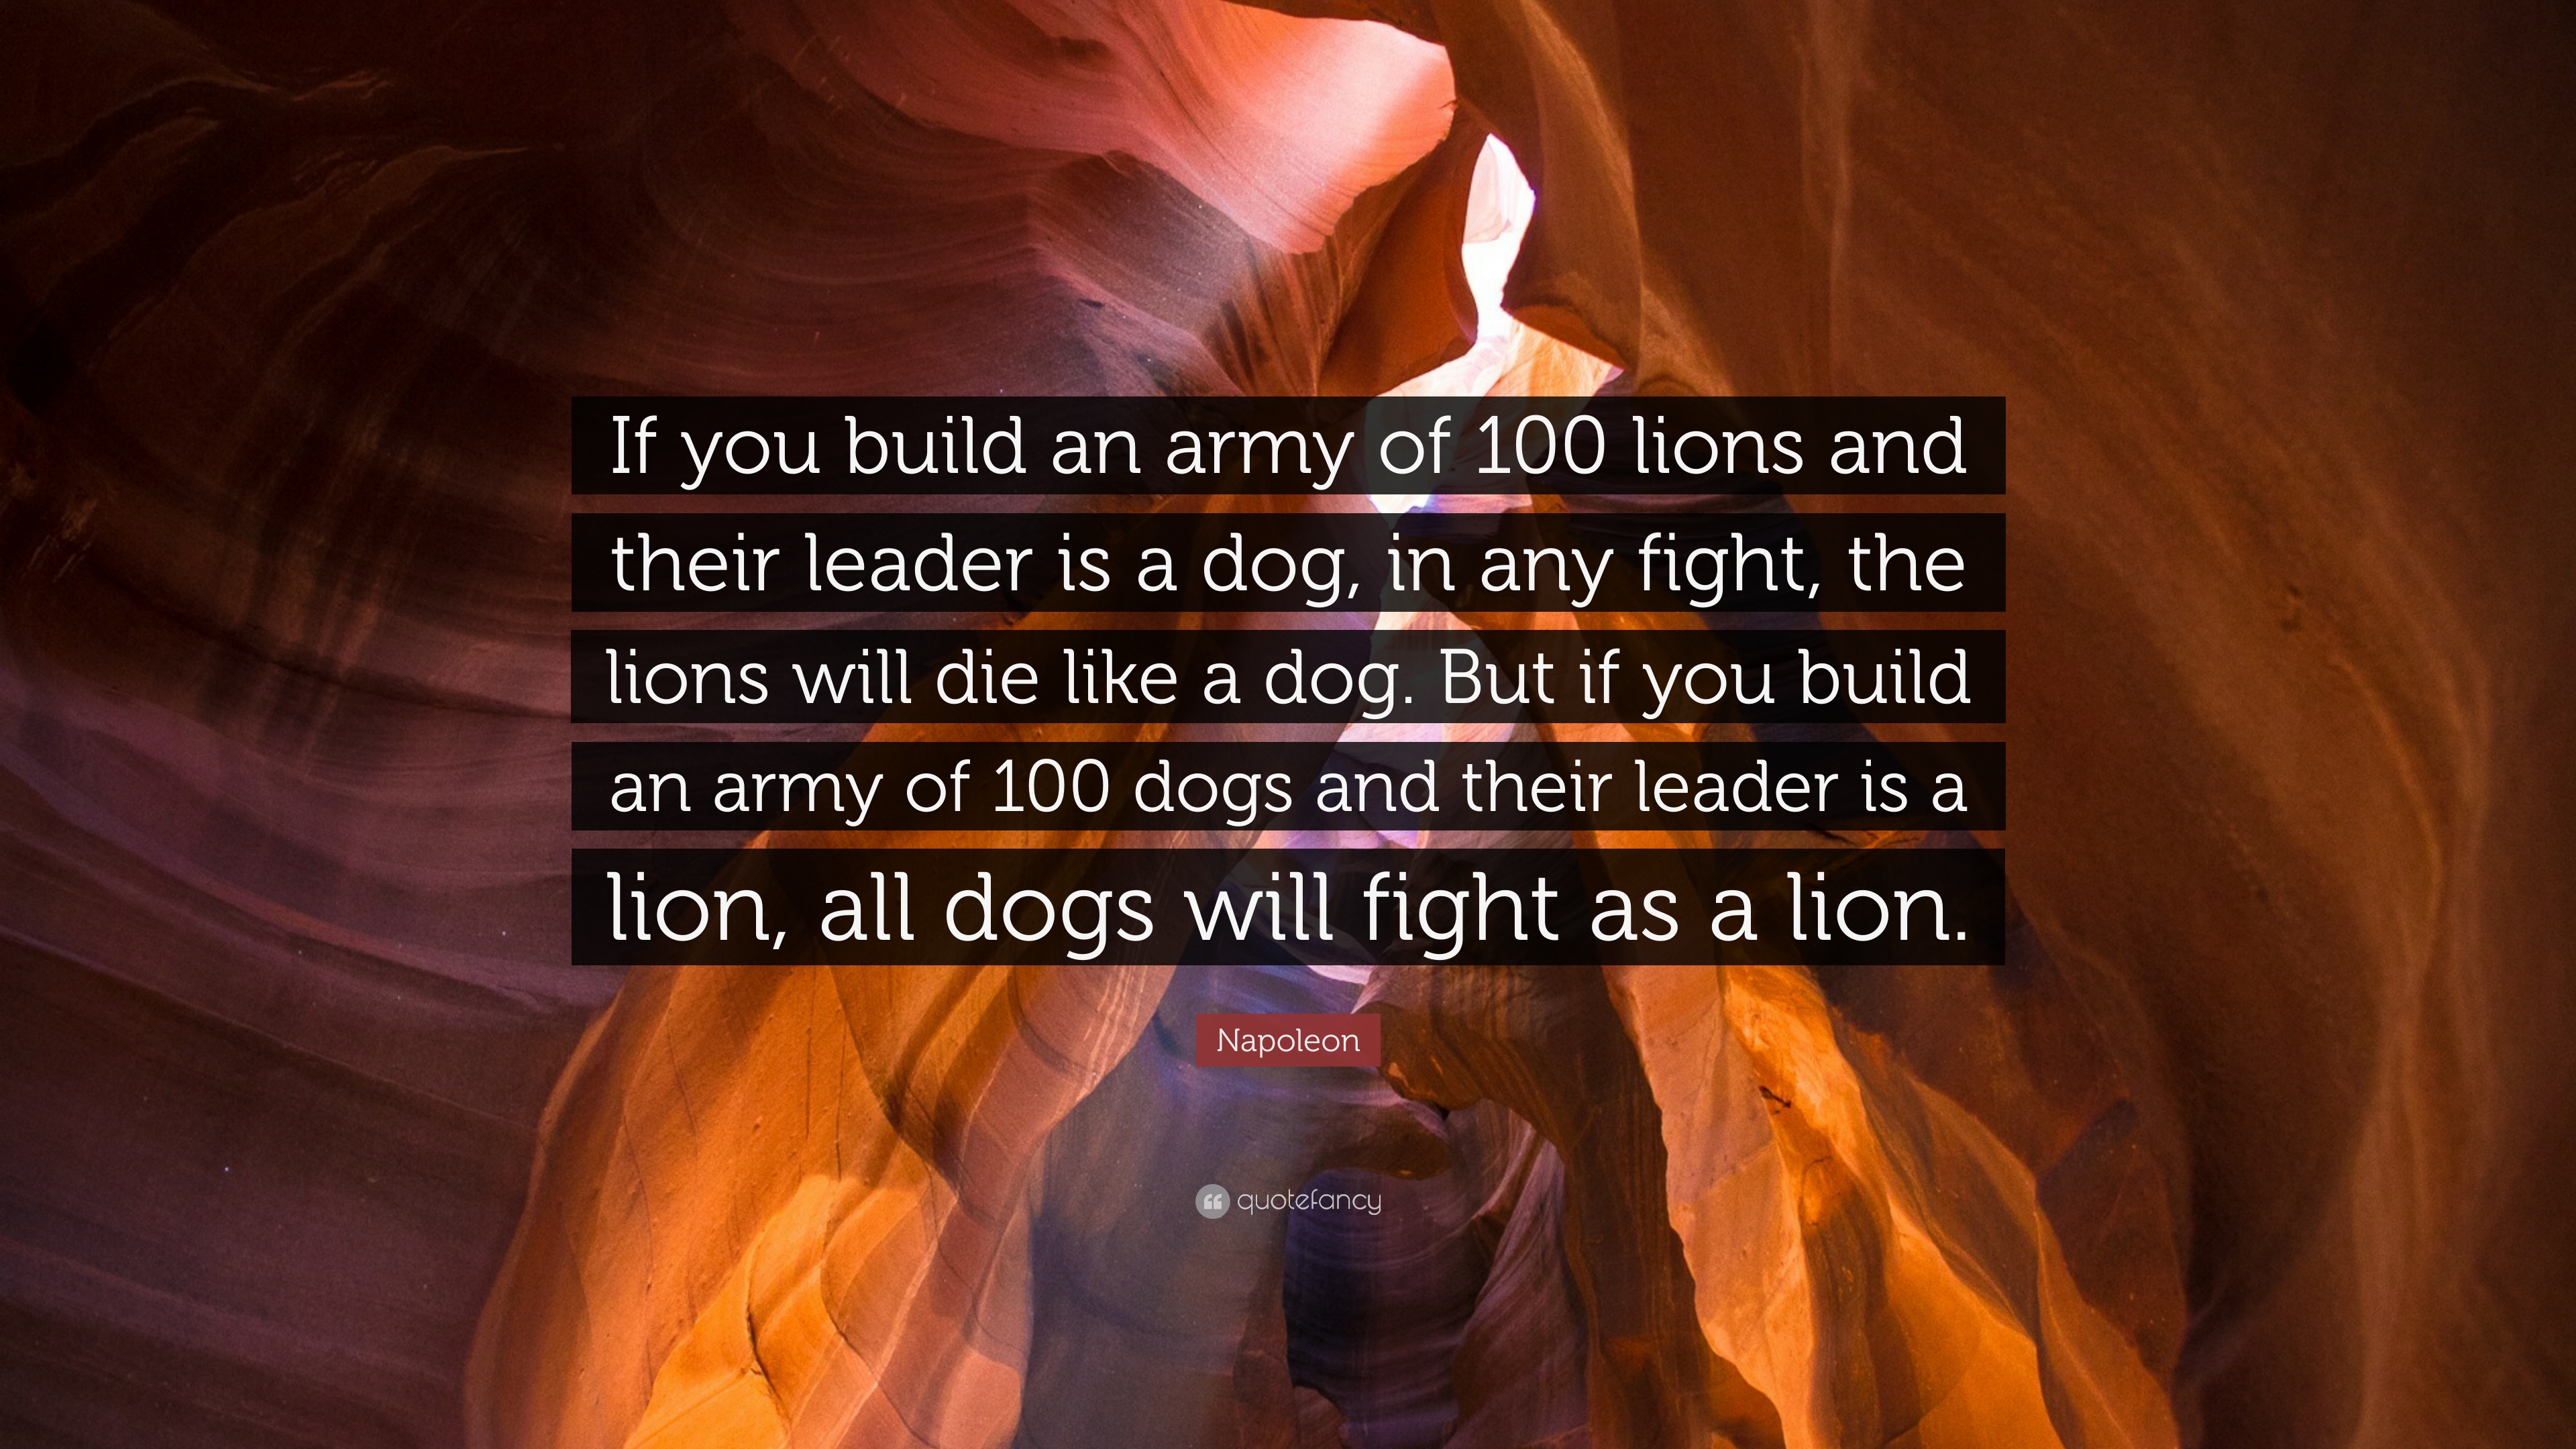 Napoleon Quote: “If you build an army of 100 lions and their leader